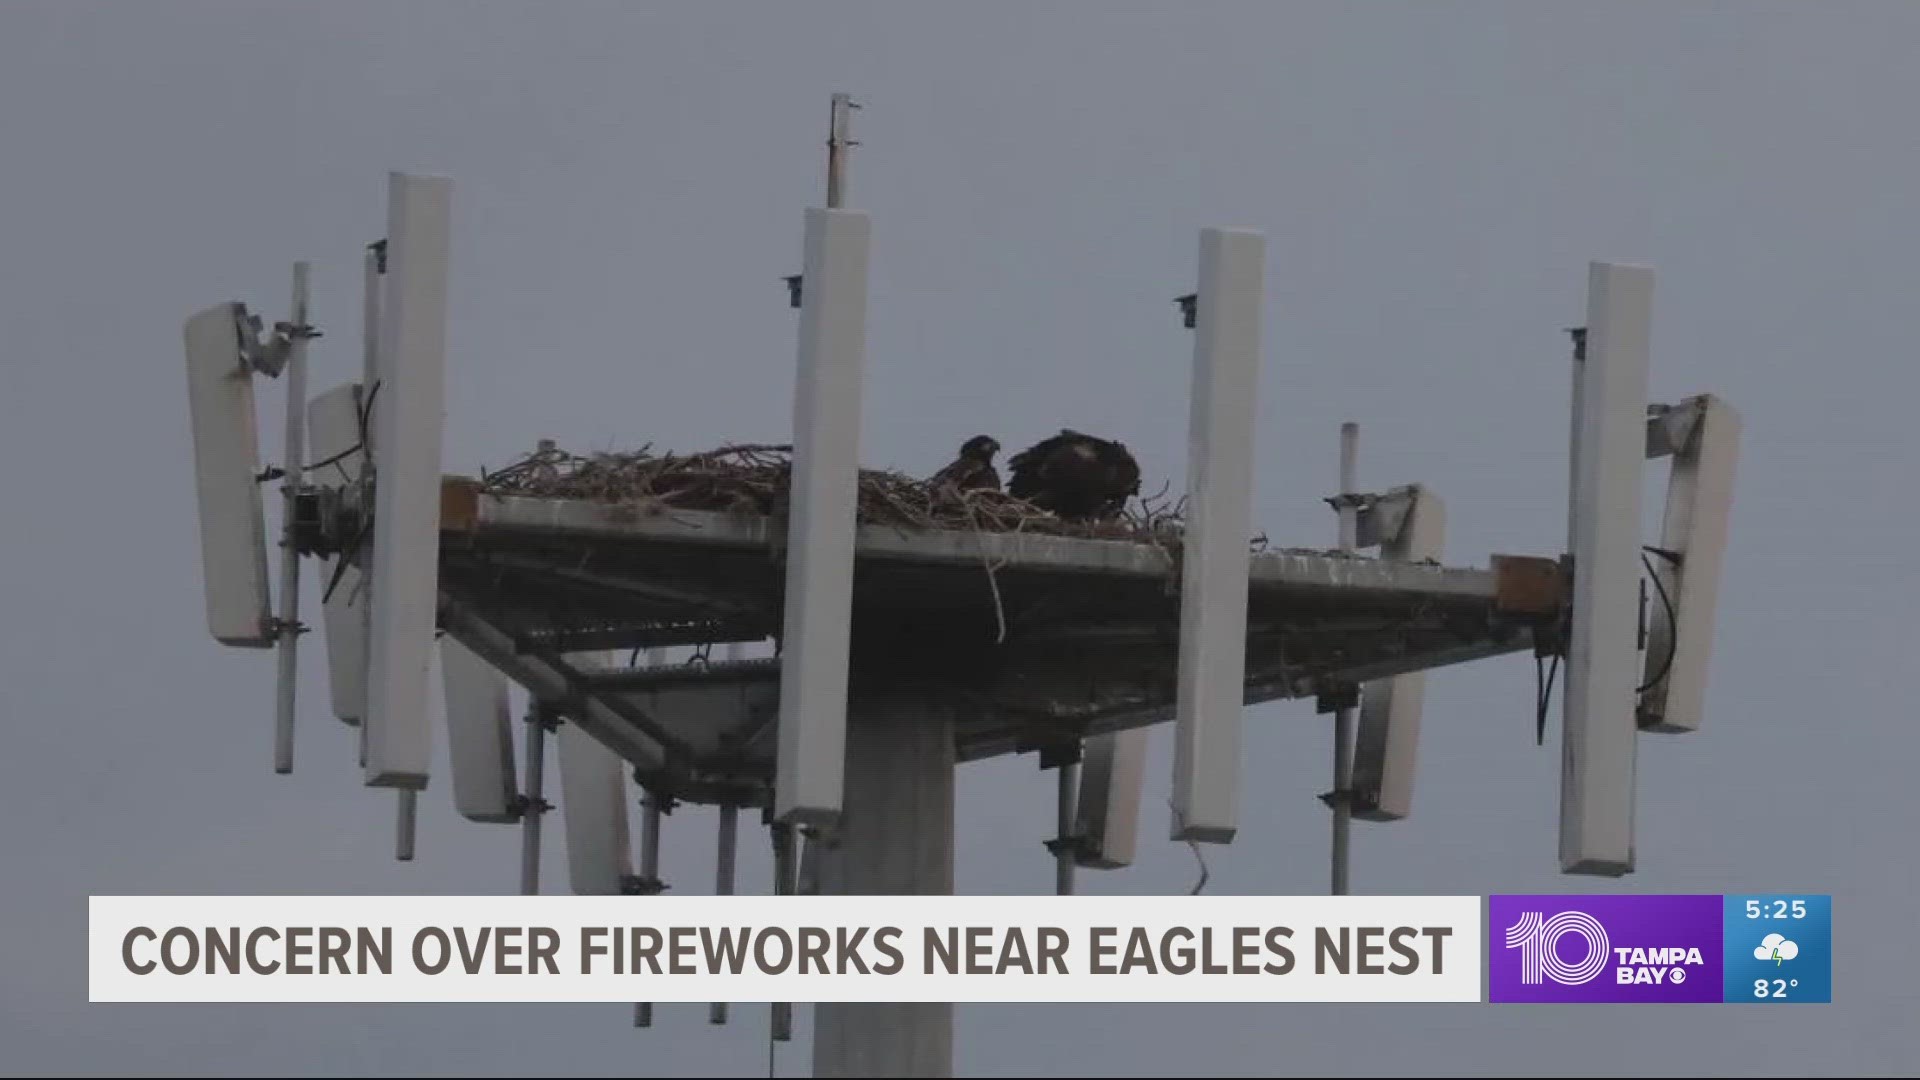 The Clearwater Threshers baseball team advertises fireworks displays following every Saturday home game. The problem? Eaglets are growing nearby.